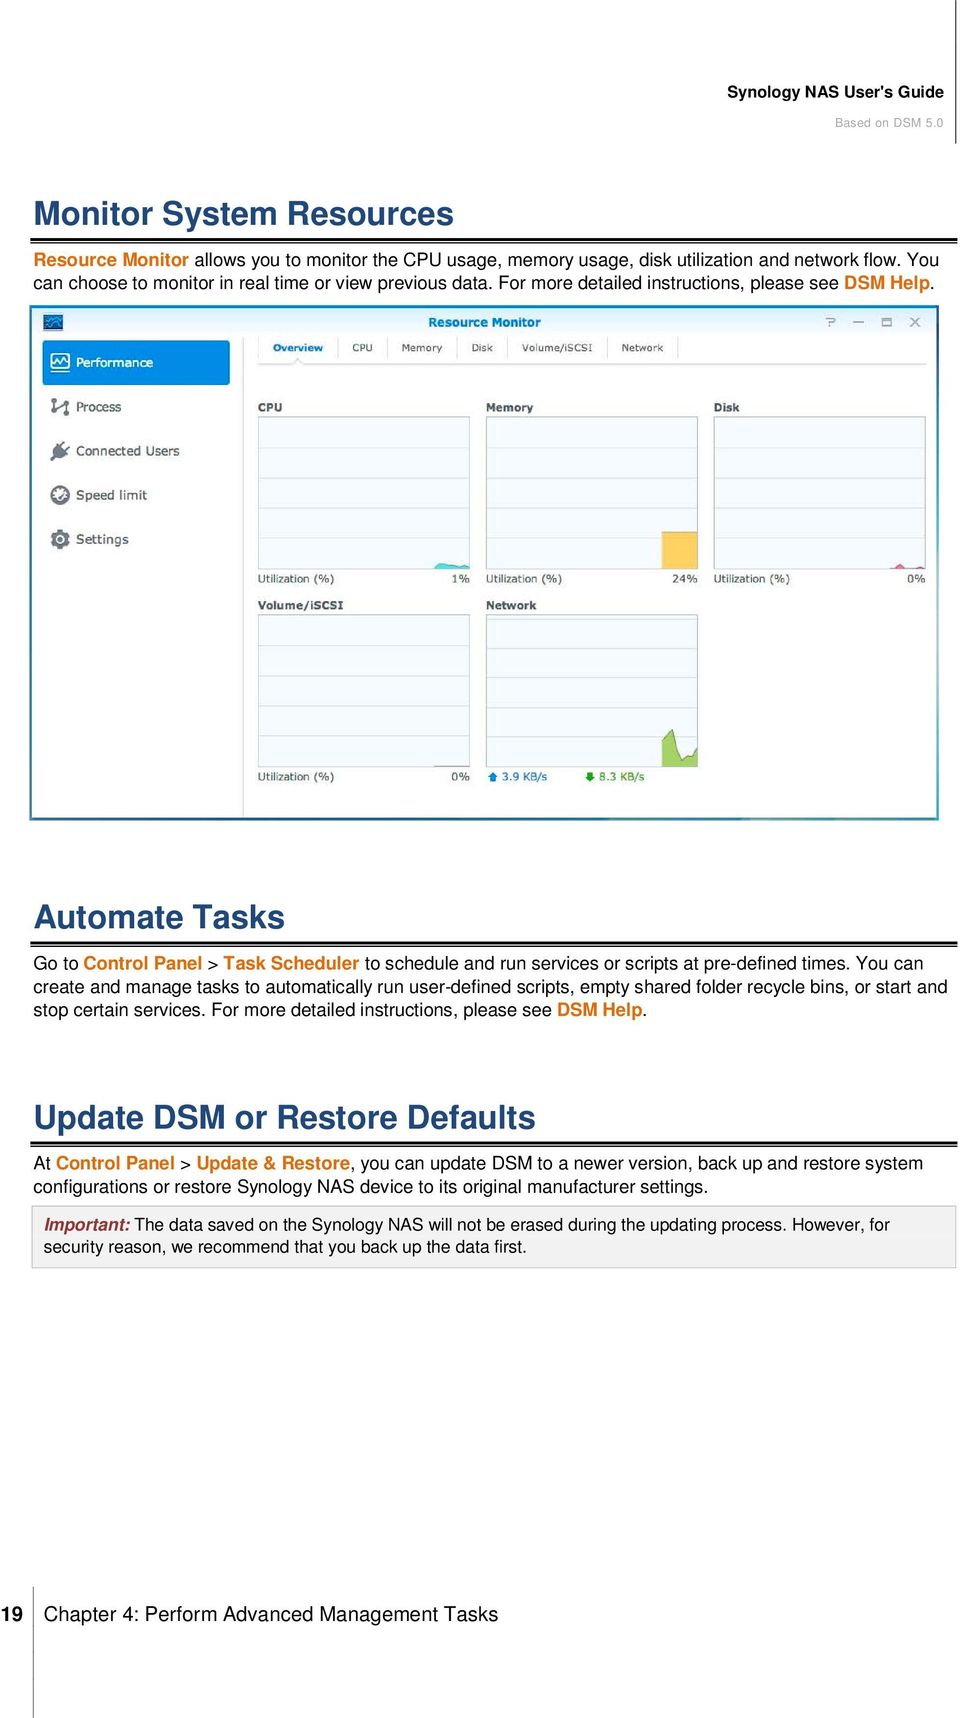 Automate Tasks Go to Control Panel > Task Scheduler to schedule and run services or scripts at pre-defined times.